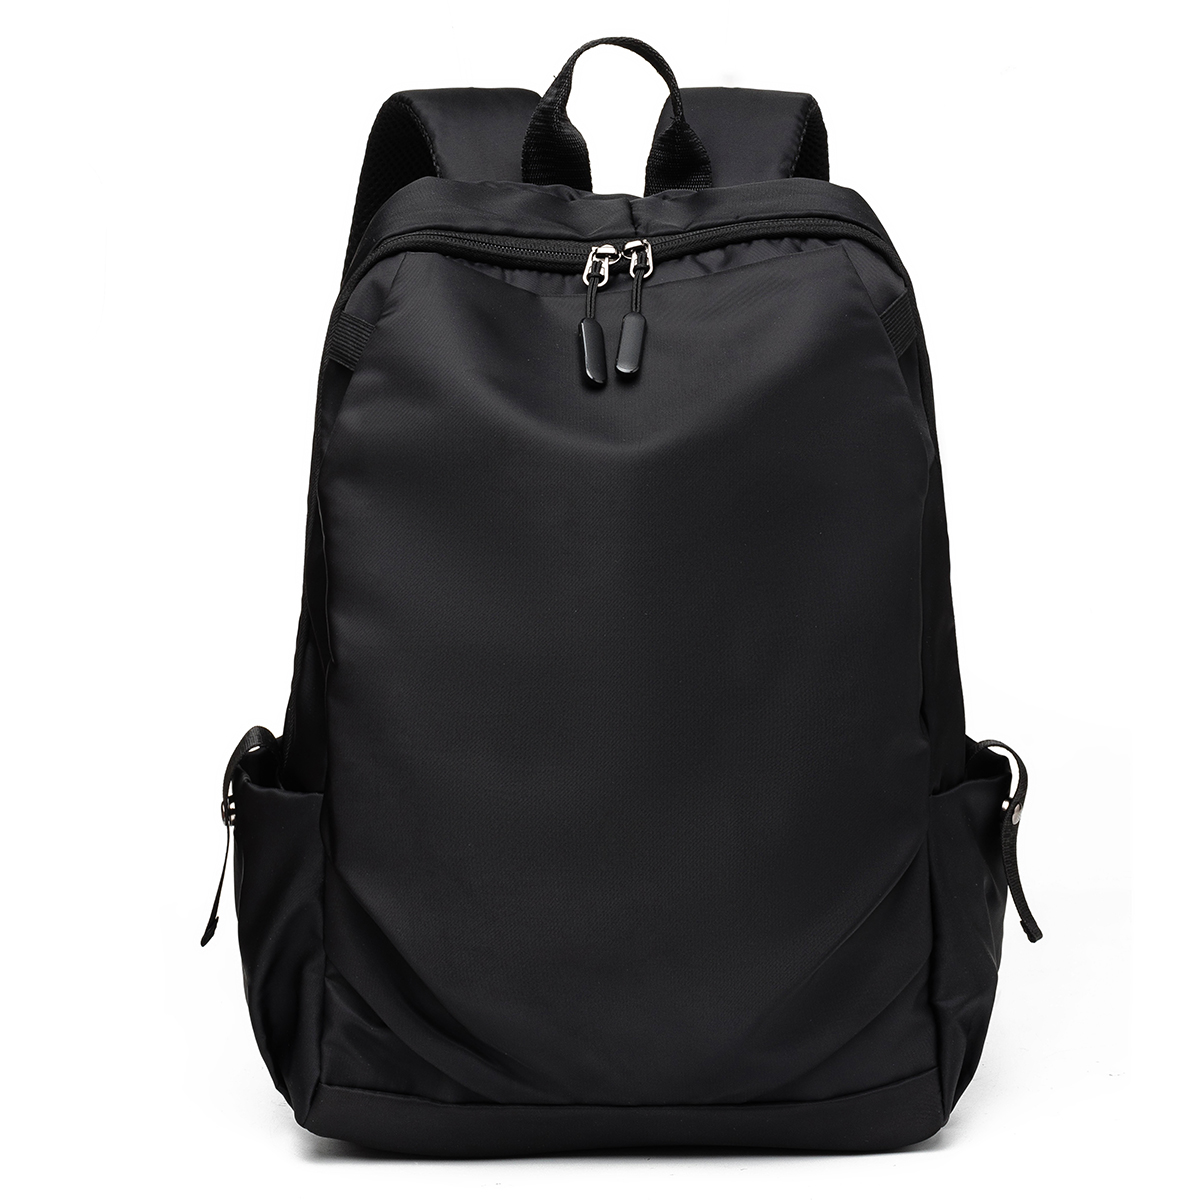 Find OURBAG Casual Simple Outdoor Sports Travel Backpack USB Charging Laptop Bag Student School Bag for 15 6 inches Laptops iPads for Sale on Gipsybee.com with cryptocurrencies